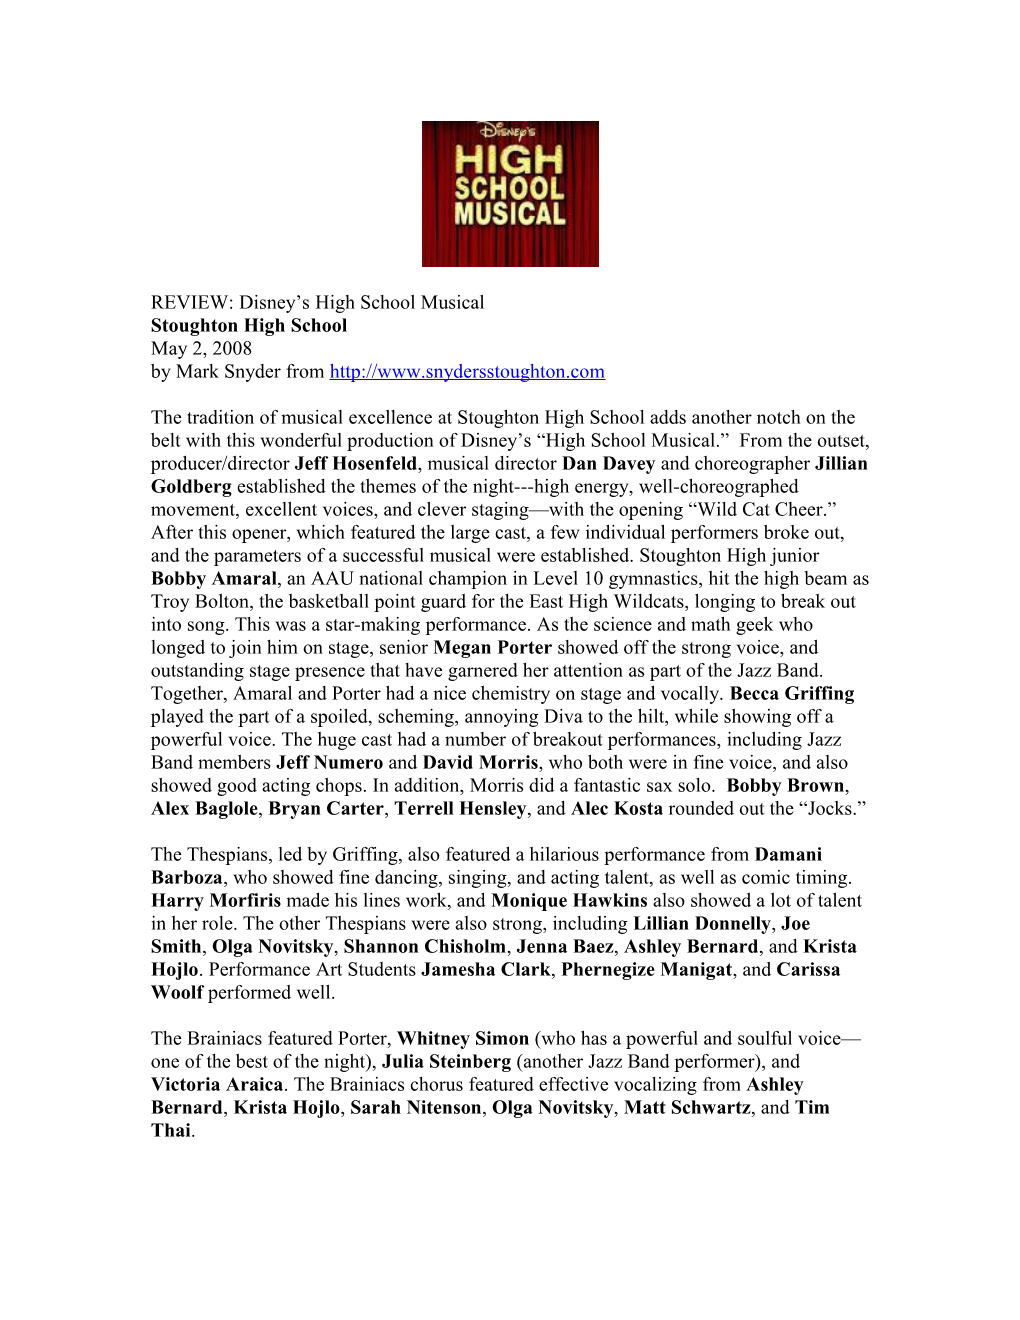 REVIEW: Disney S High School Musical Stoughton High School May 2, 2008 by Mark Snyder From